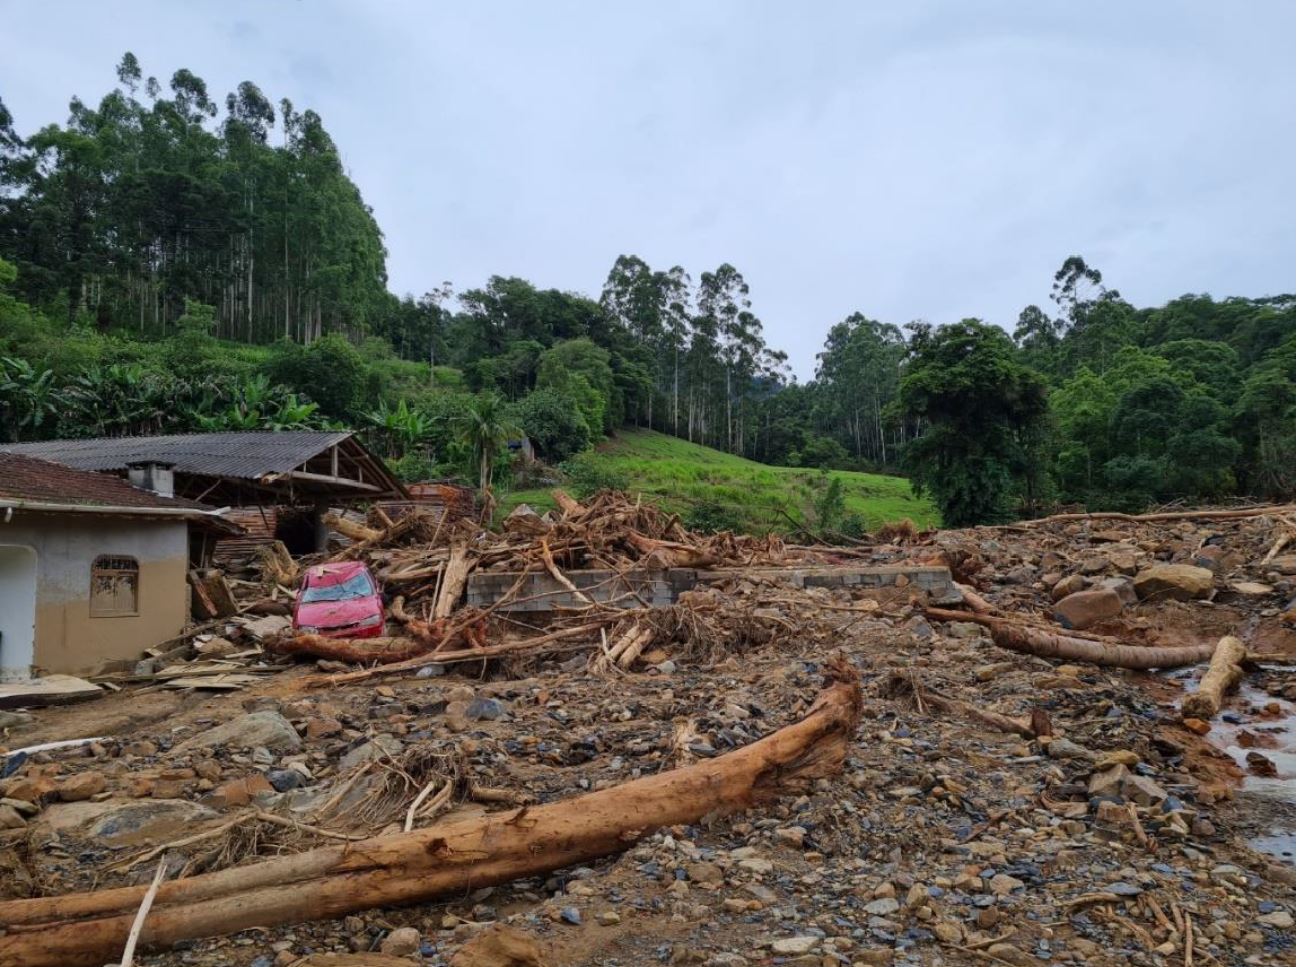 Damage caused by landslides in the Revólver Creek valley in Presidente Getulio. Photo by Renato Lima.